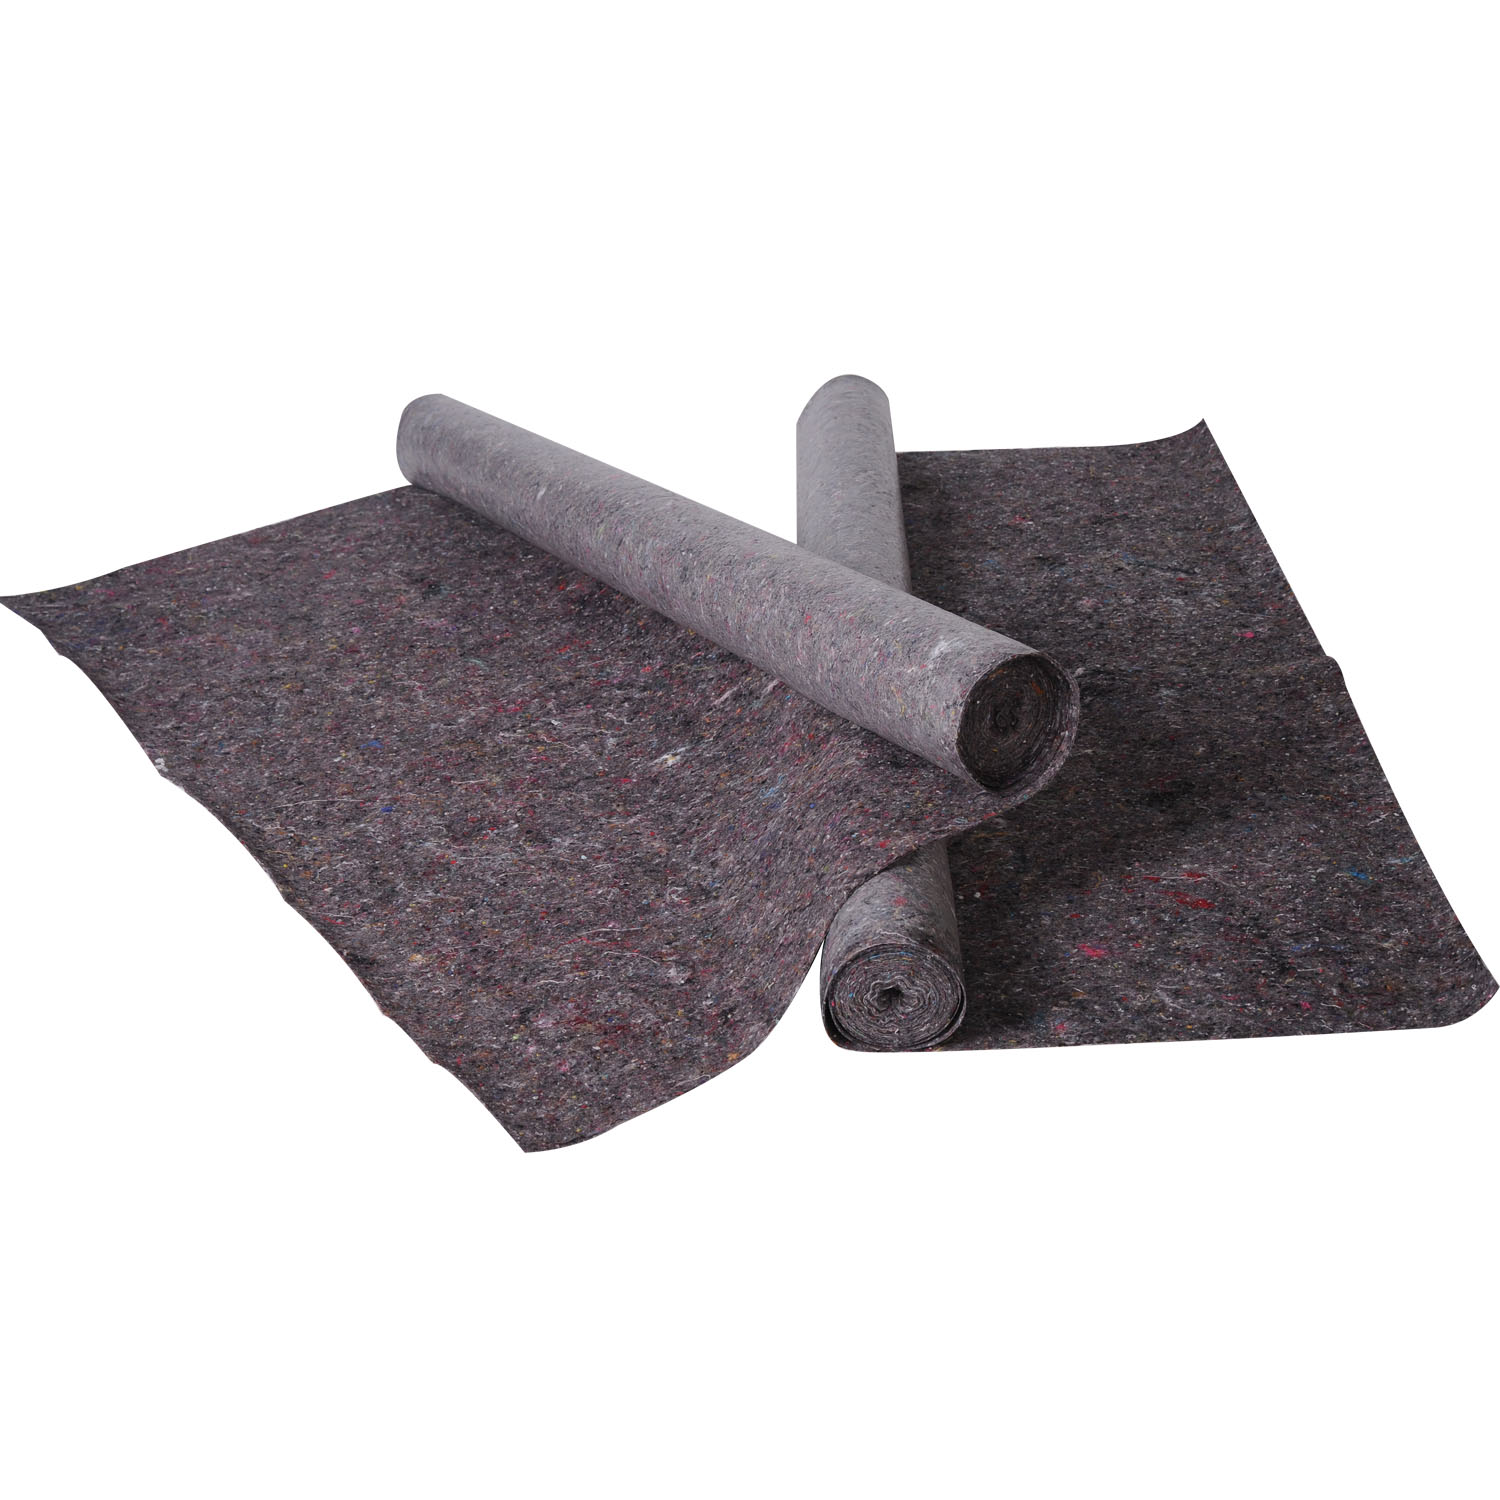 2021 recycle material painter felt with Anti-Slip cover fleece painter with felt floor protection roll